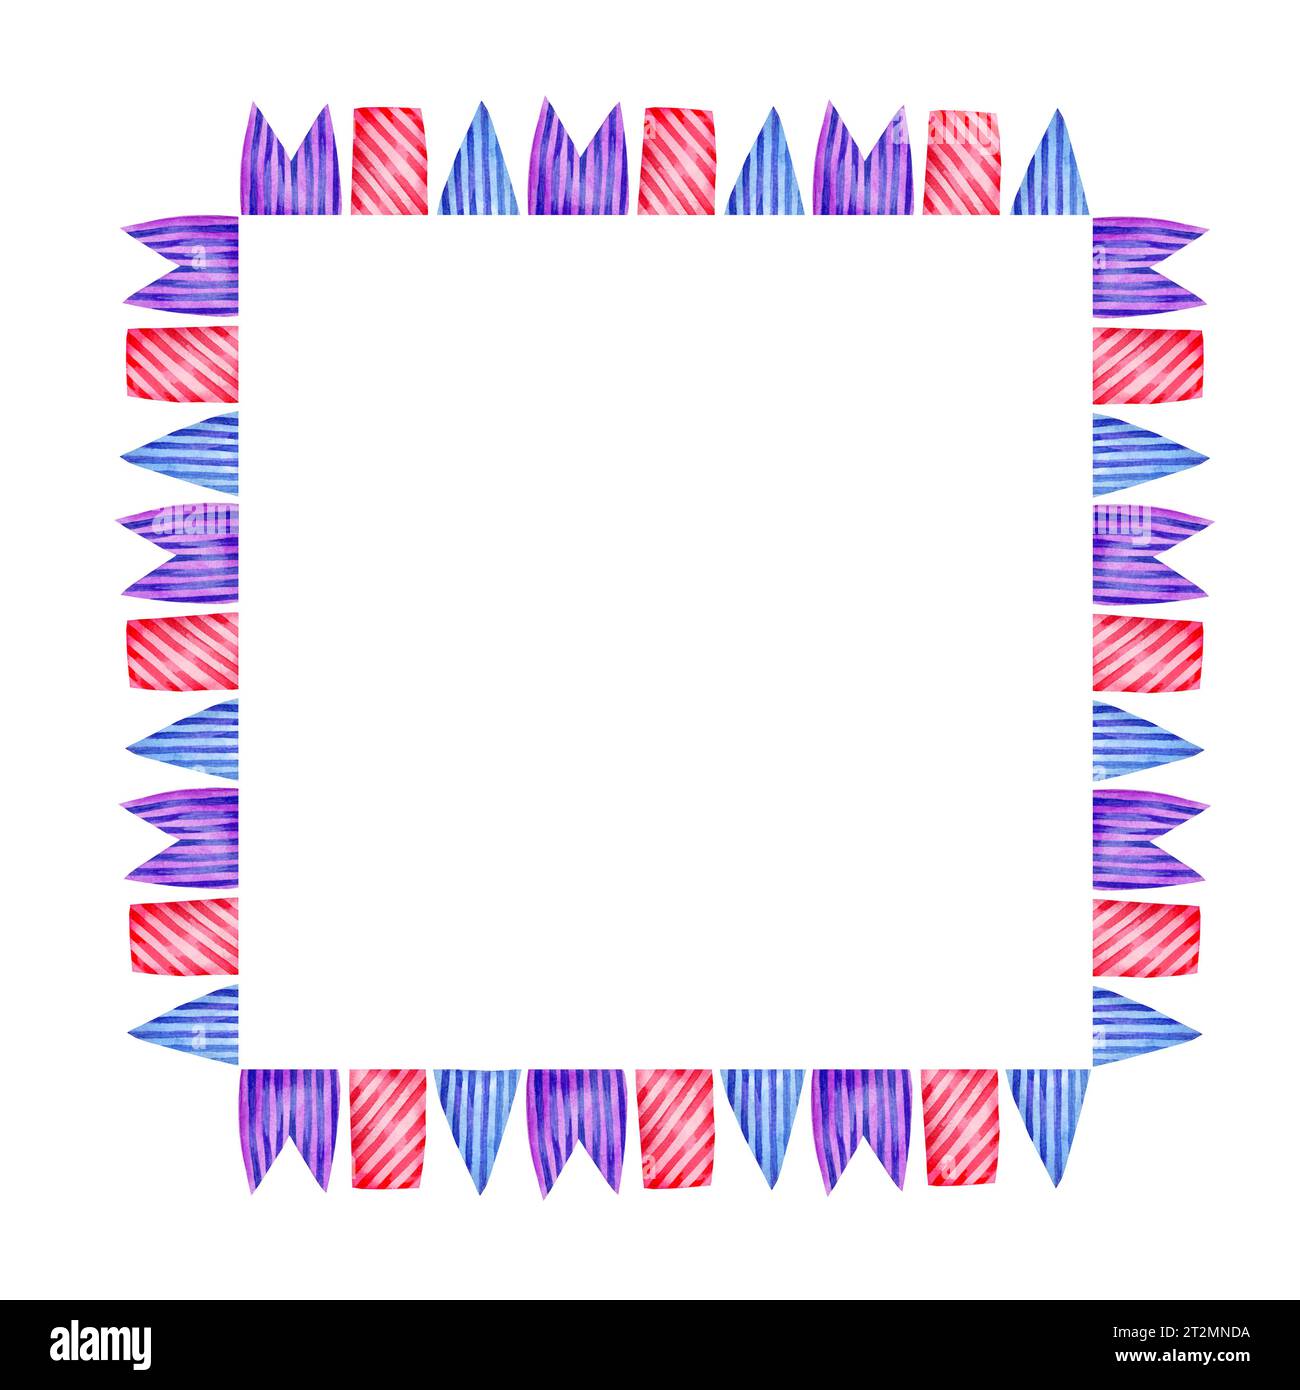 Watercolor square frame with different striped flags, hand drawn illustration of garland of blue, magenta, purple flags isolated on white background. Stock Photo